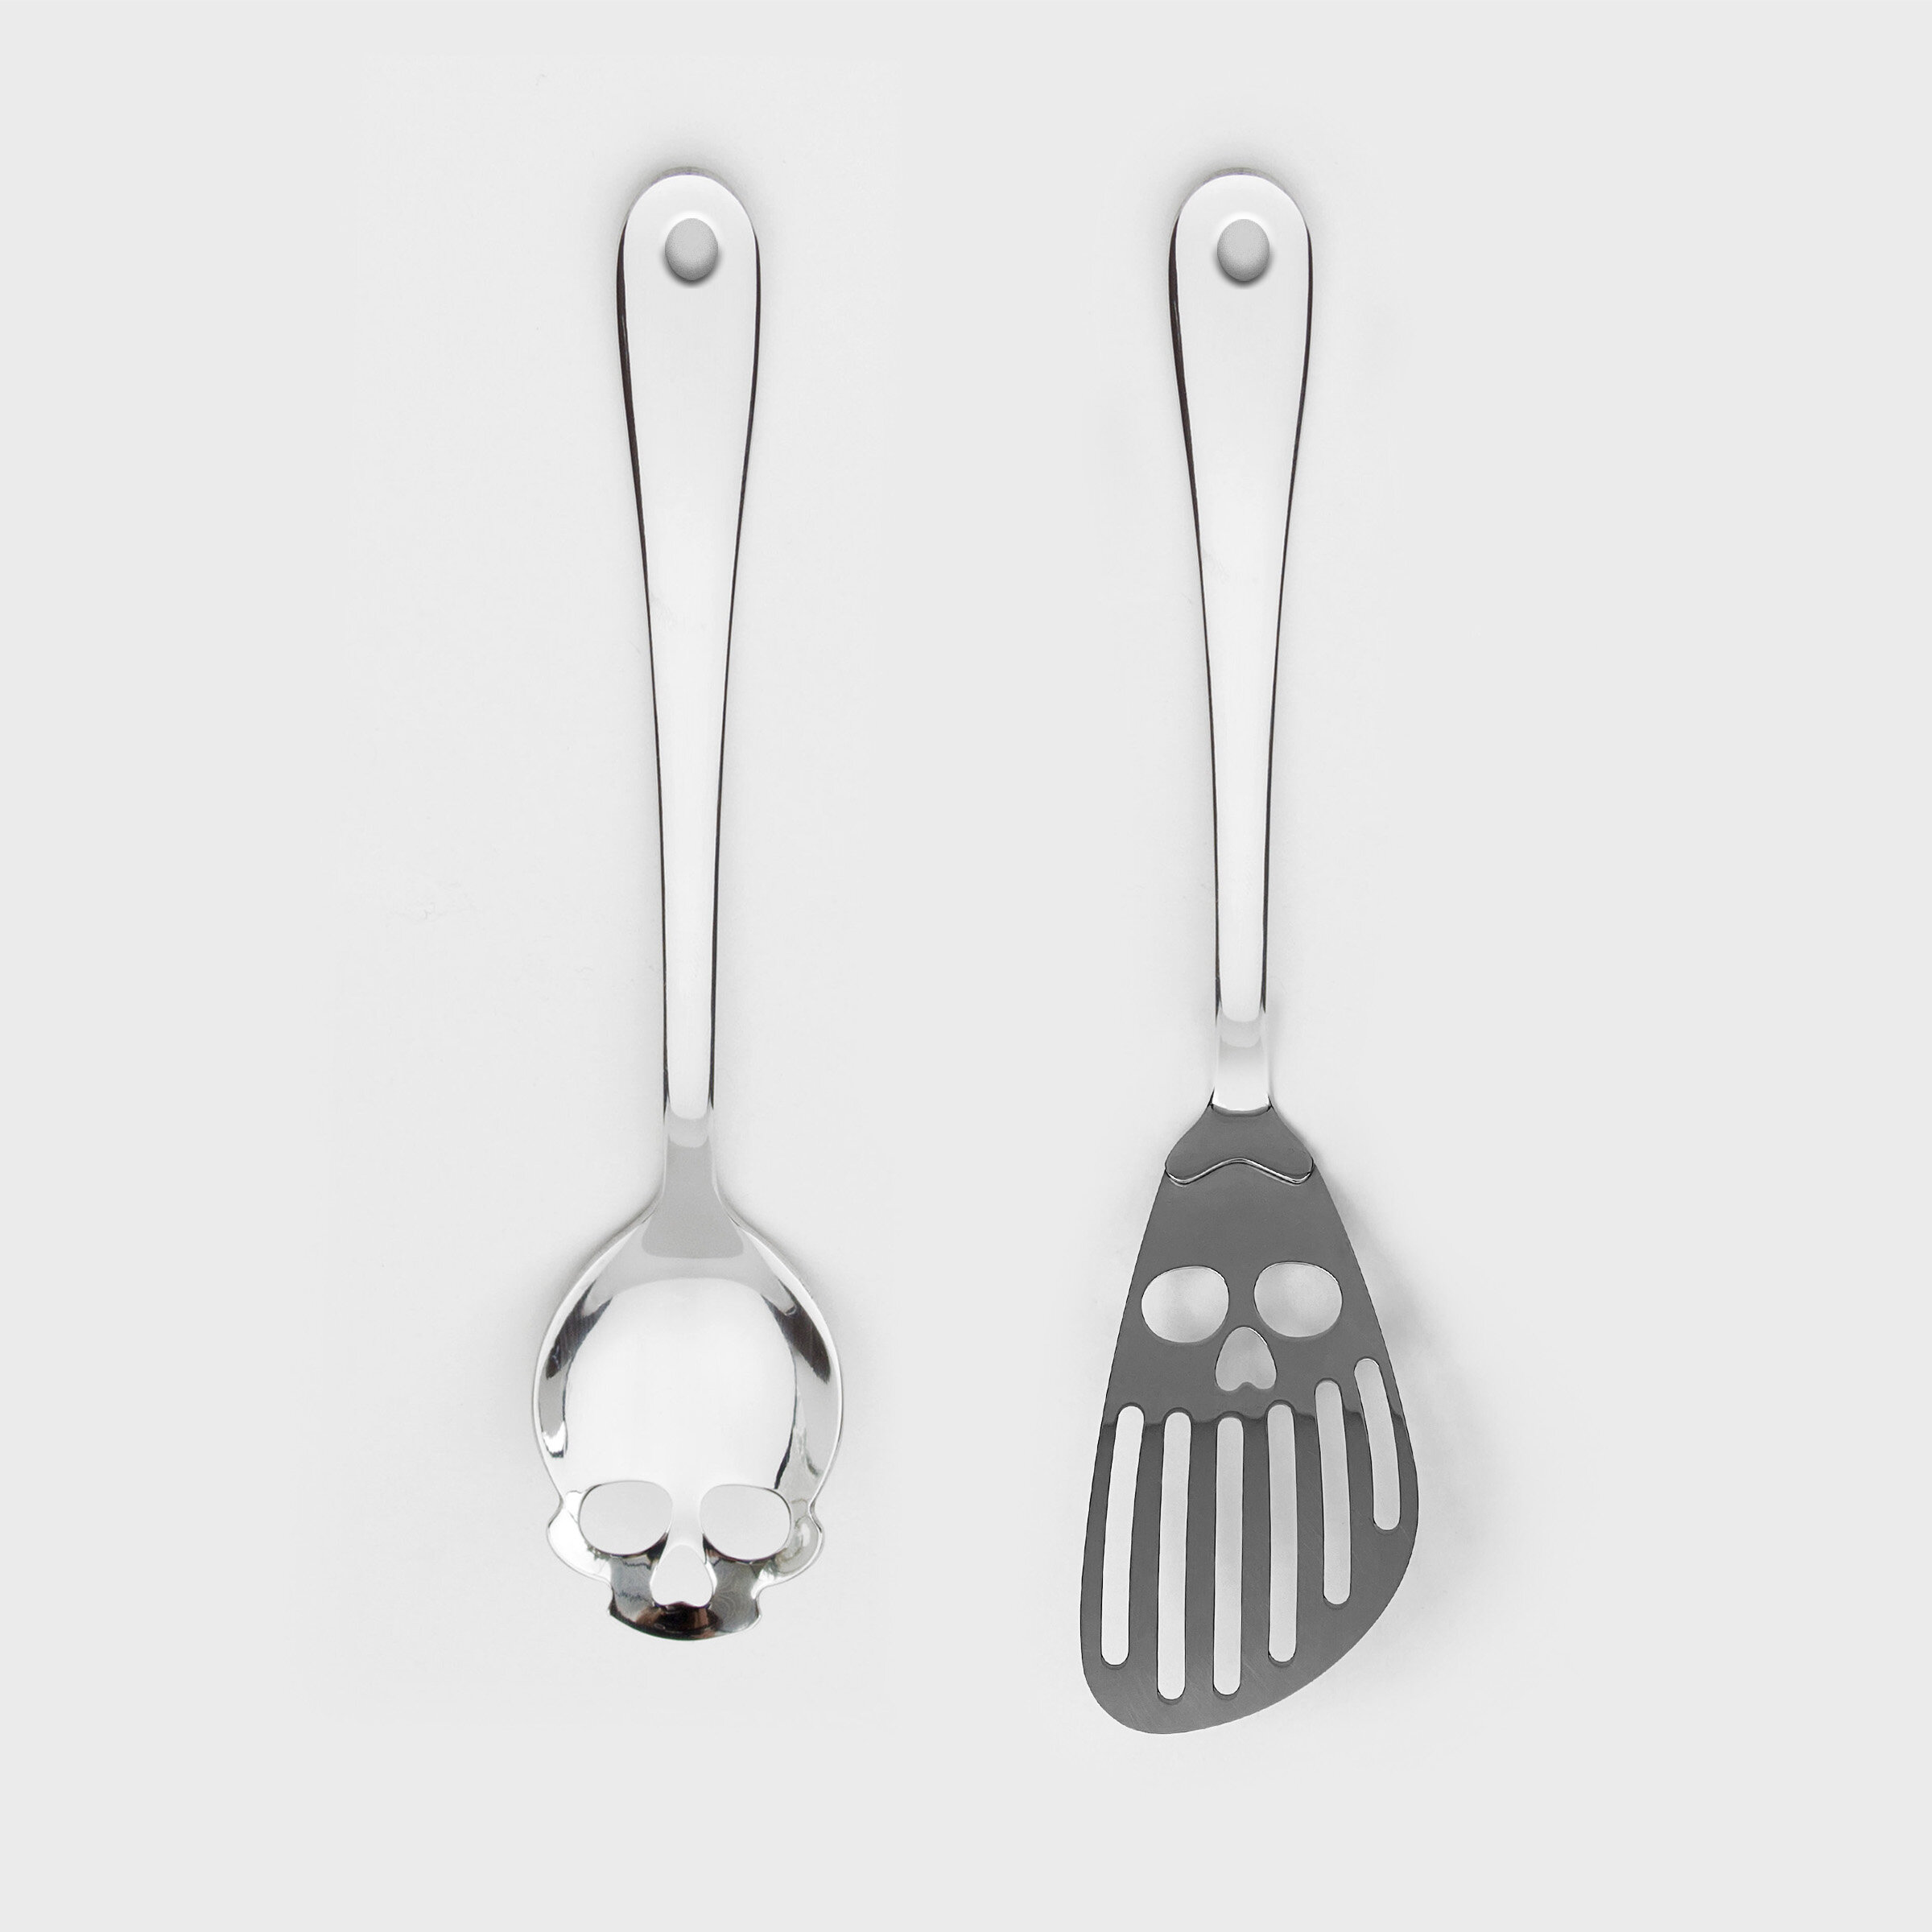 Skull Spatula and Serving Spoon